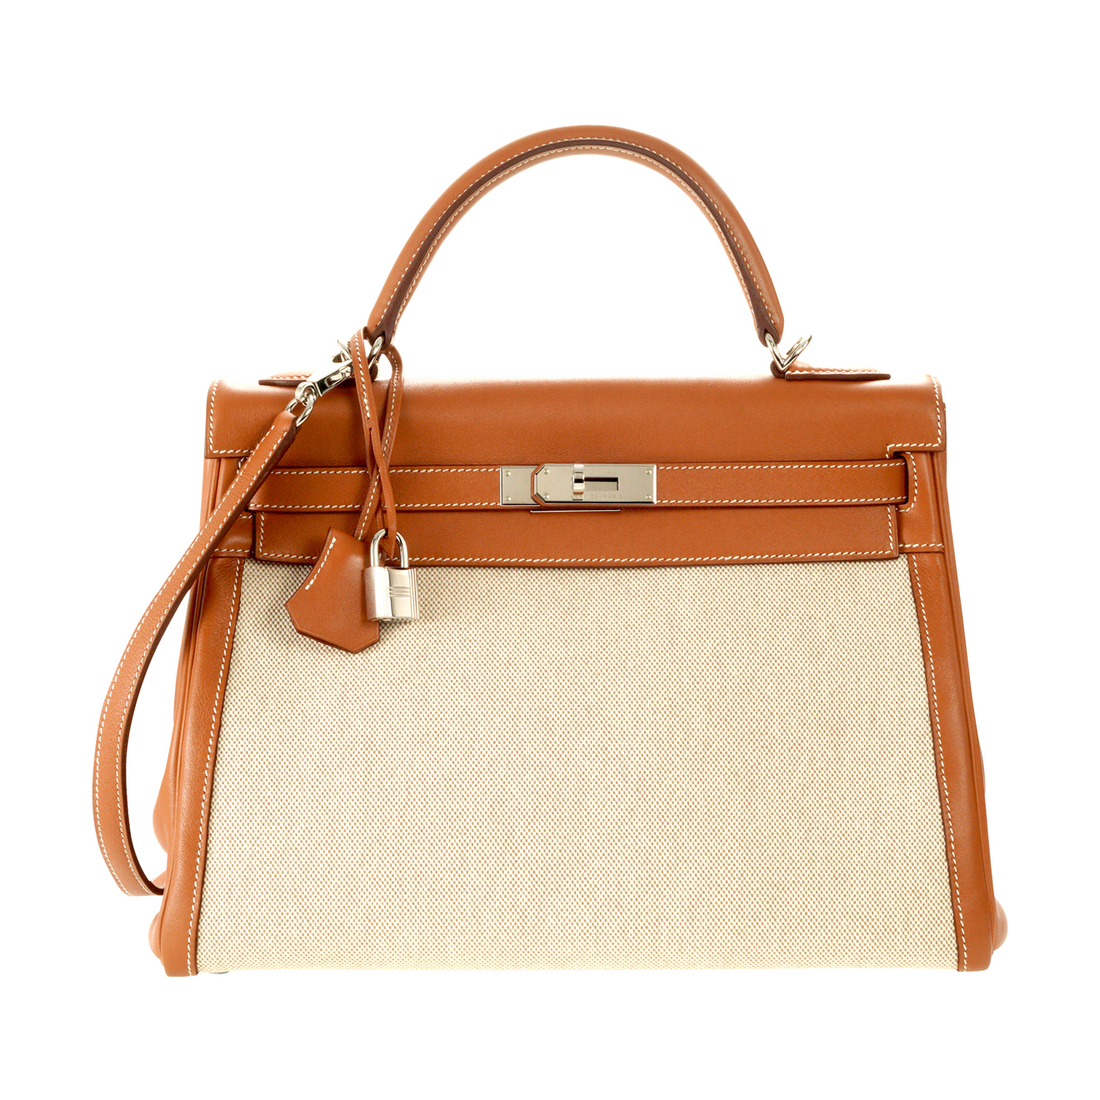 At Auction: Hermes Beige/Chai Toile H and Swift Leather Birkin 25